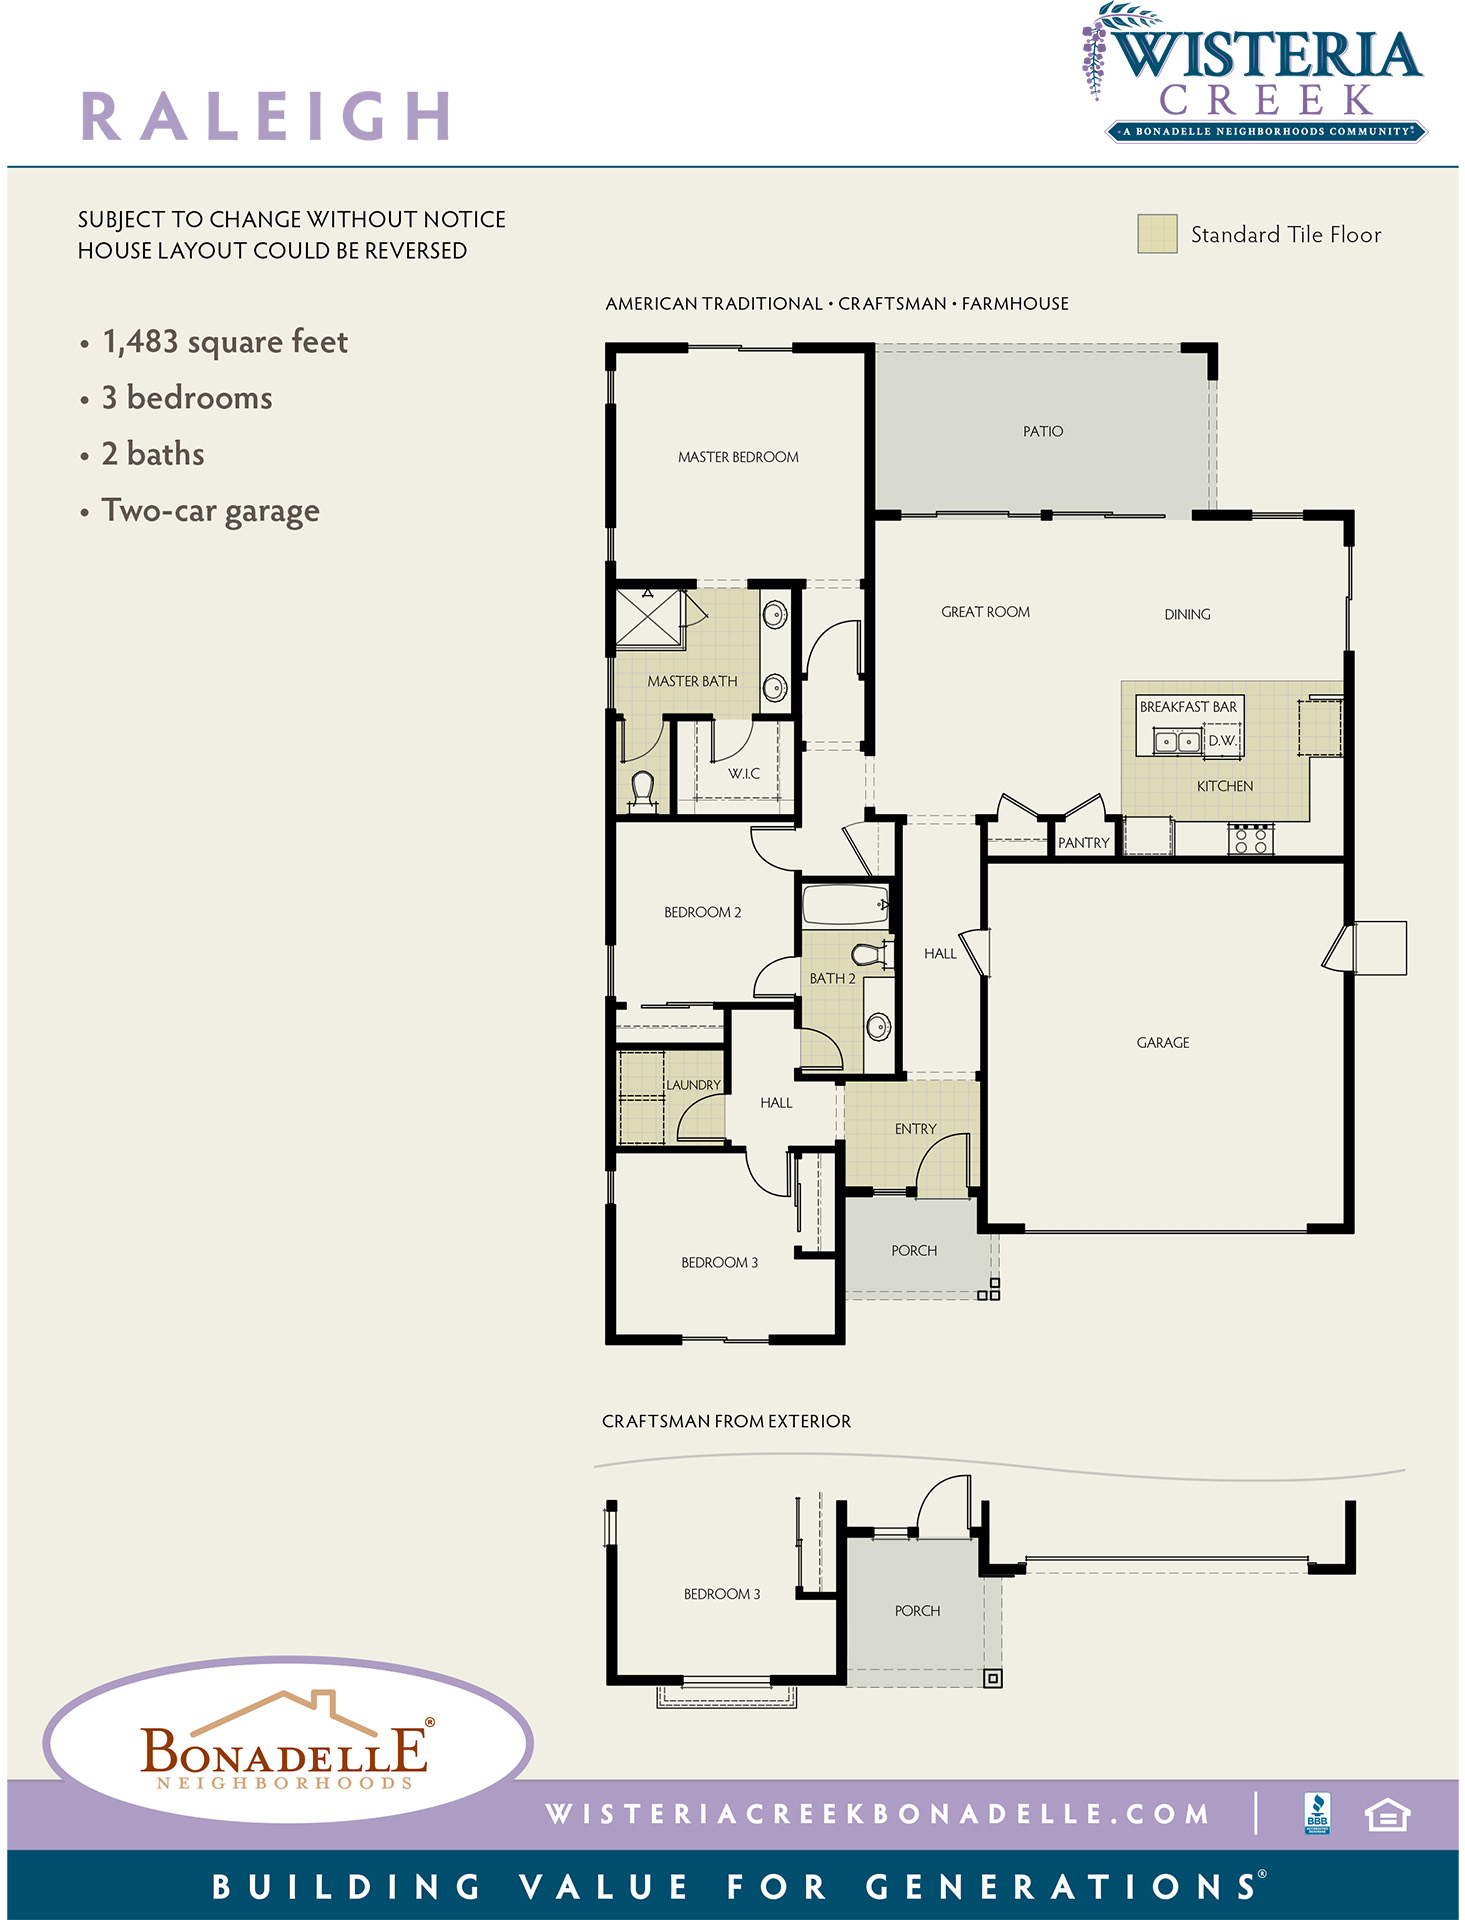 Raleigh Floorplan. Subject to change without notice. Floorplan may be reversed. 1,483 square feet. 3 bedrooms. 2 baths. Two-car garage. Wisteria Creek: A Bonadelle Neighborhoods Community. Bonadelle Neighborhoods - Building Value for Generations.